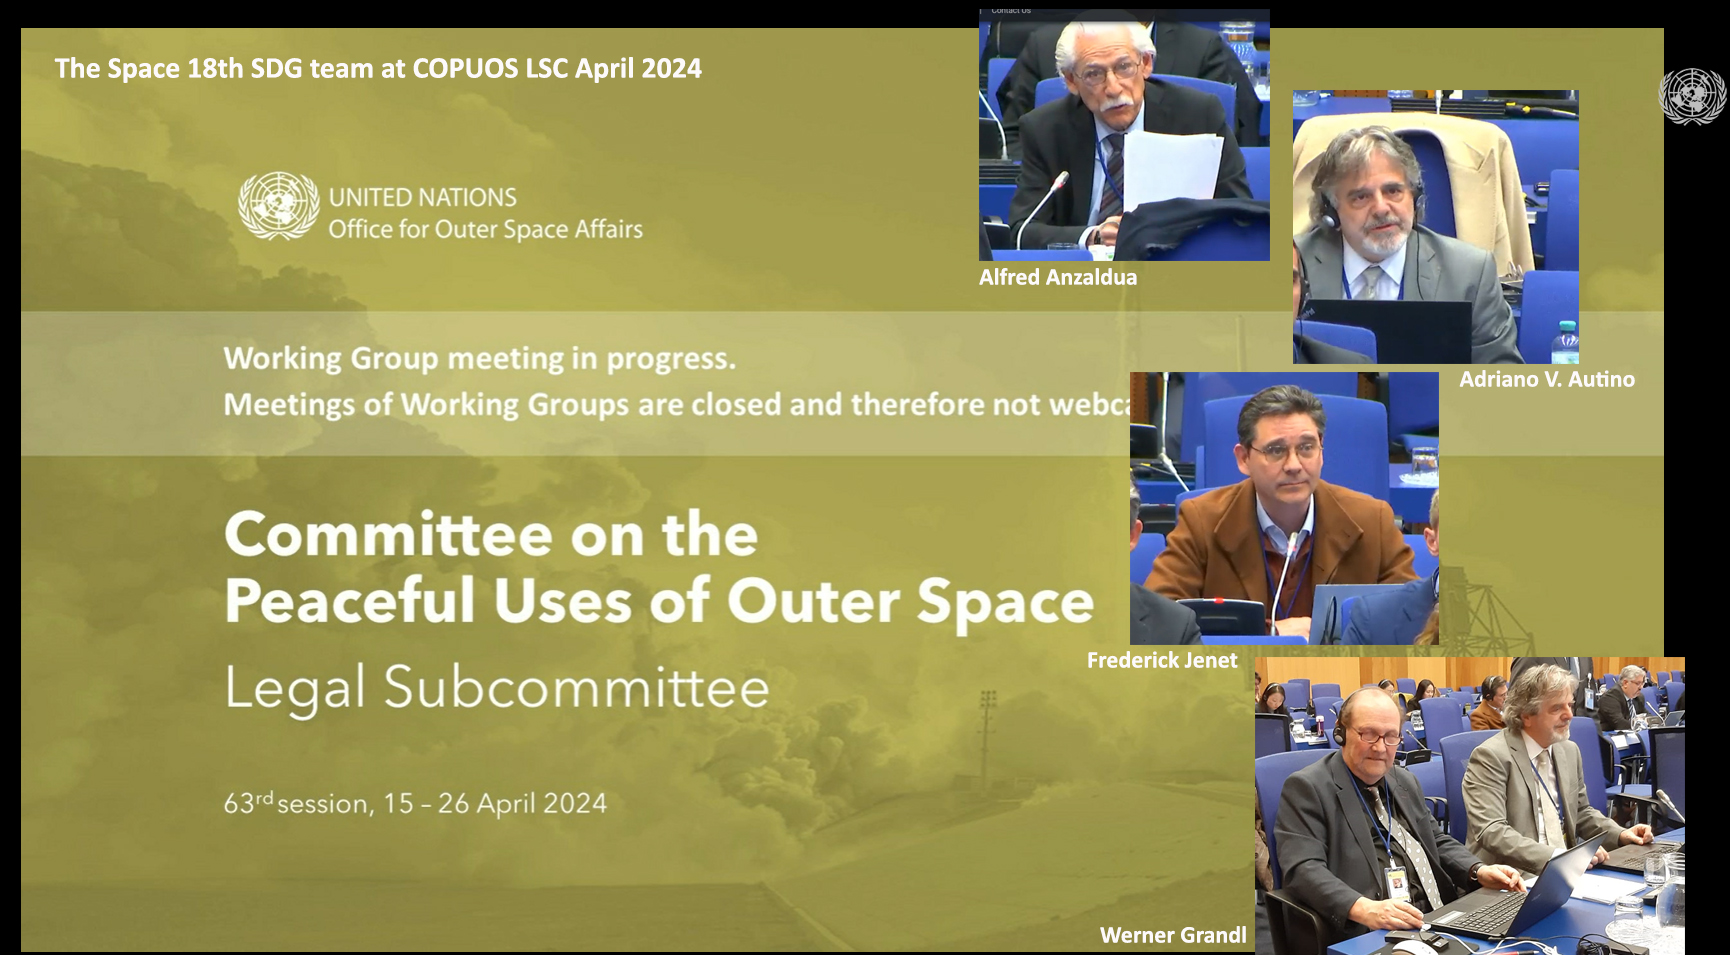 A summary of the Space 18th SDG speeches and technical presentations at COPUOS Legal Subcommittee – 15-26 April 2024